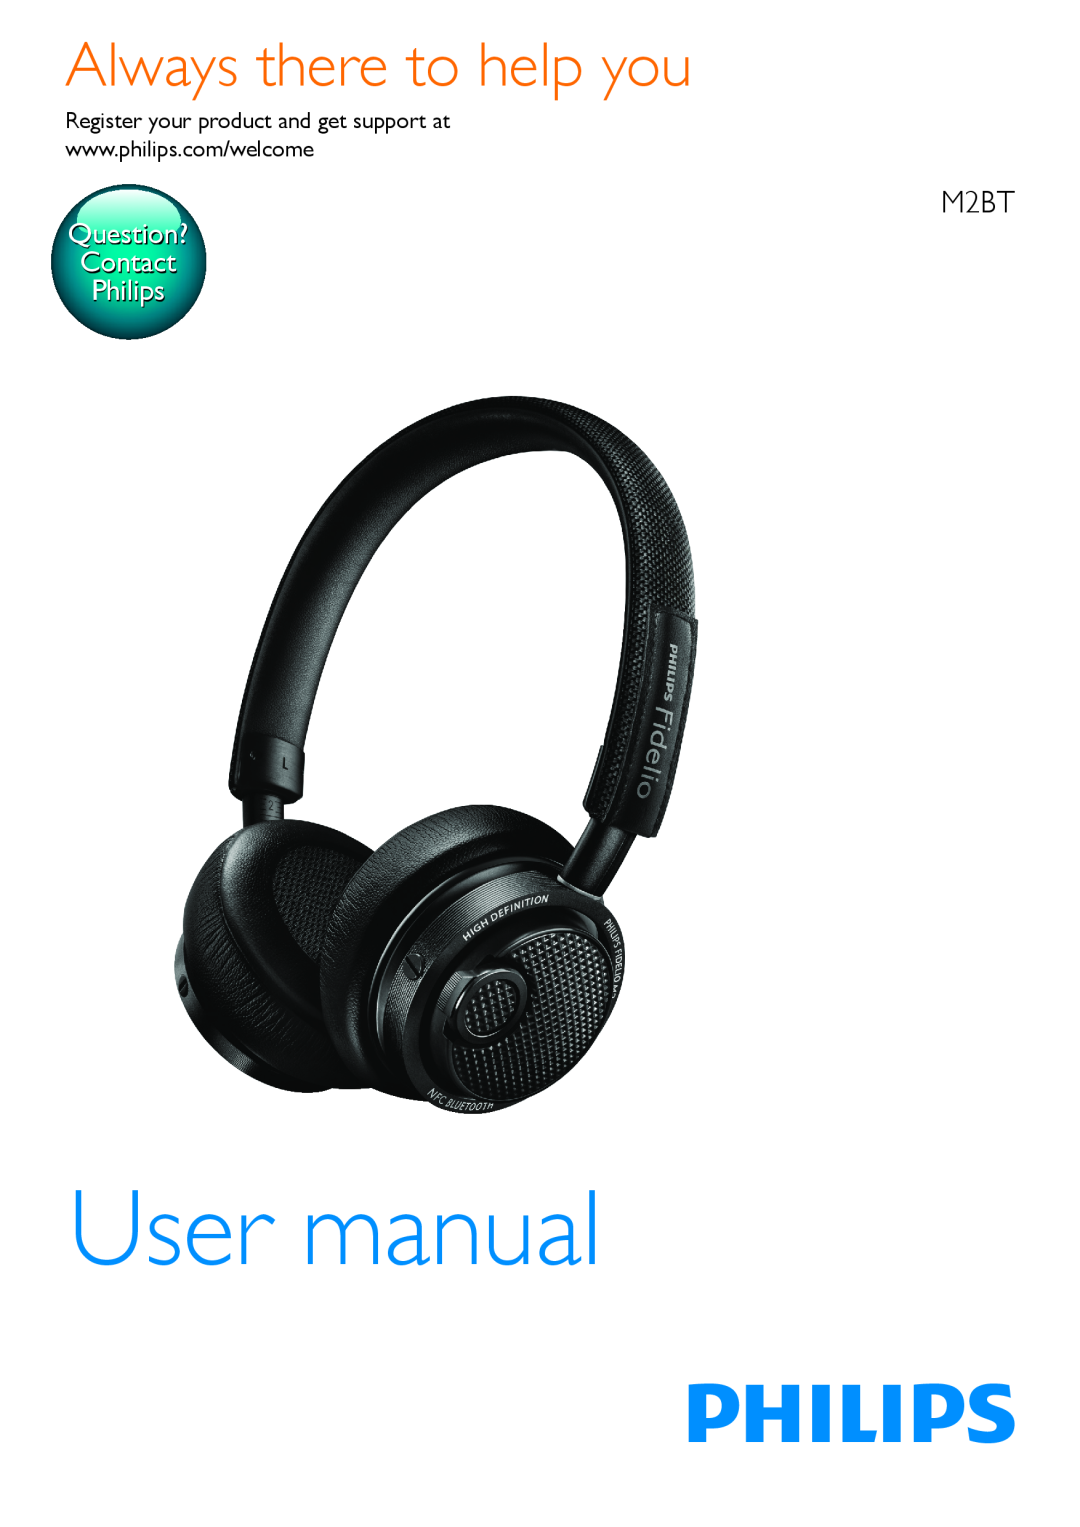 Philips M2BT user manual Always there to help you, Question? Contact Philips 